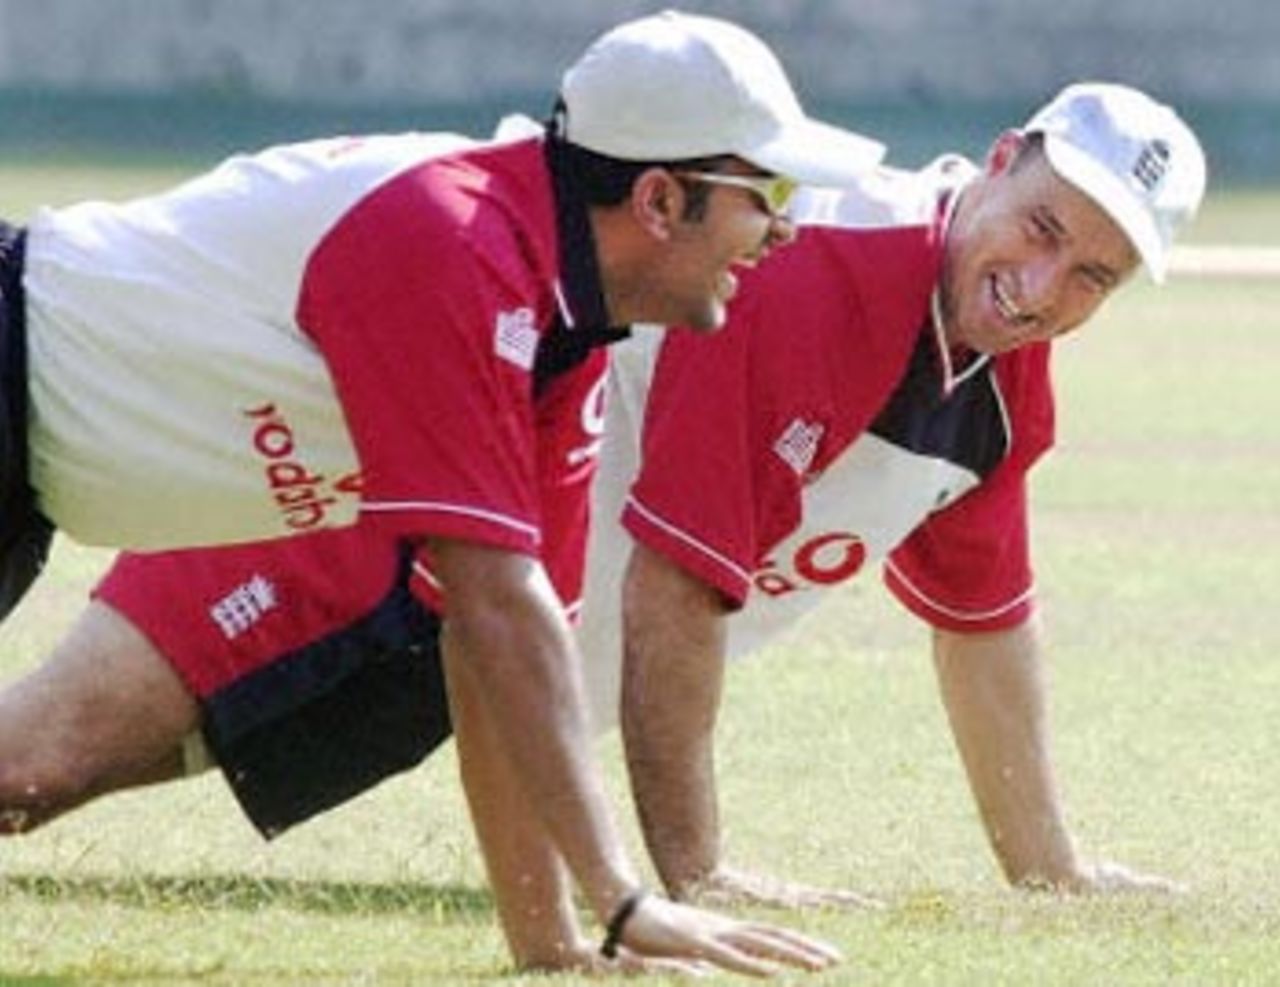 Nasser Hussain and James Ormond share a joke during a training session, 15 October 2001: England in India, 2001-02, Wankhede Stadium, Mumbai